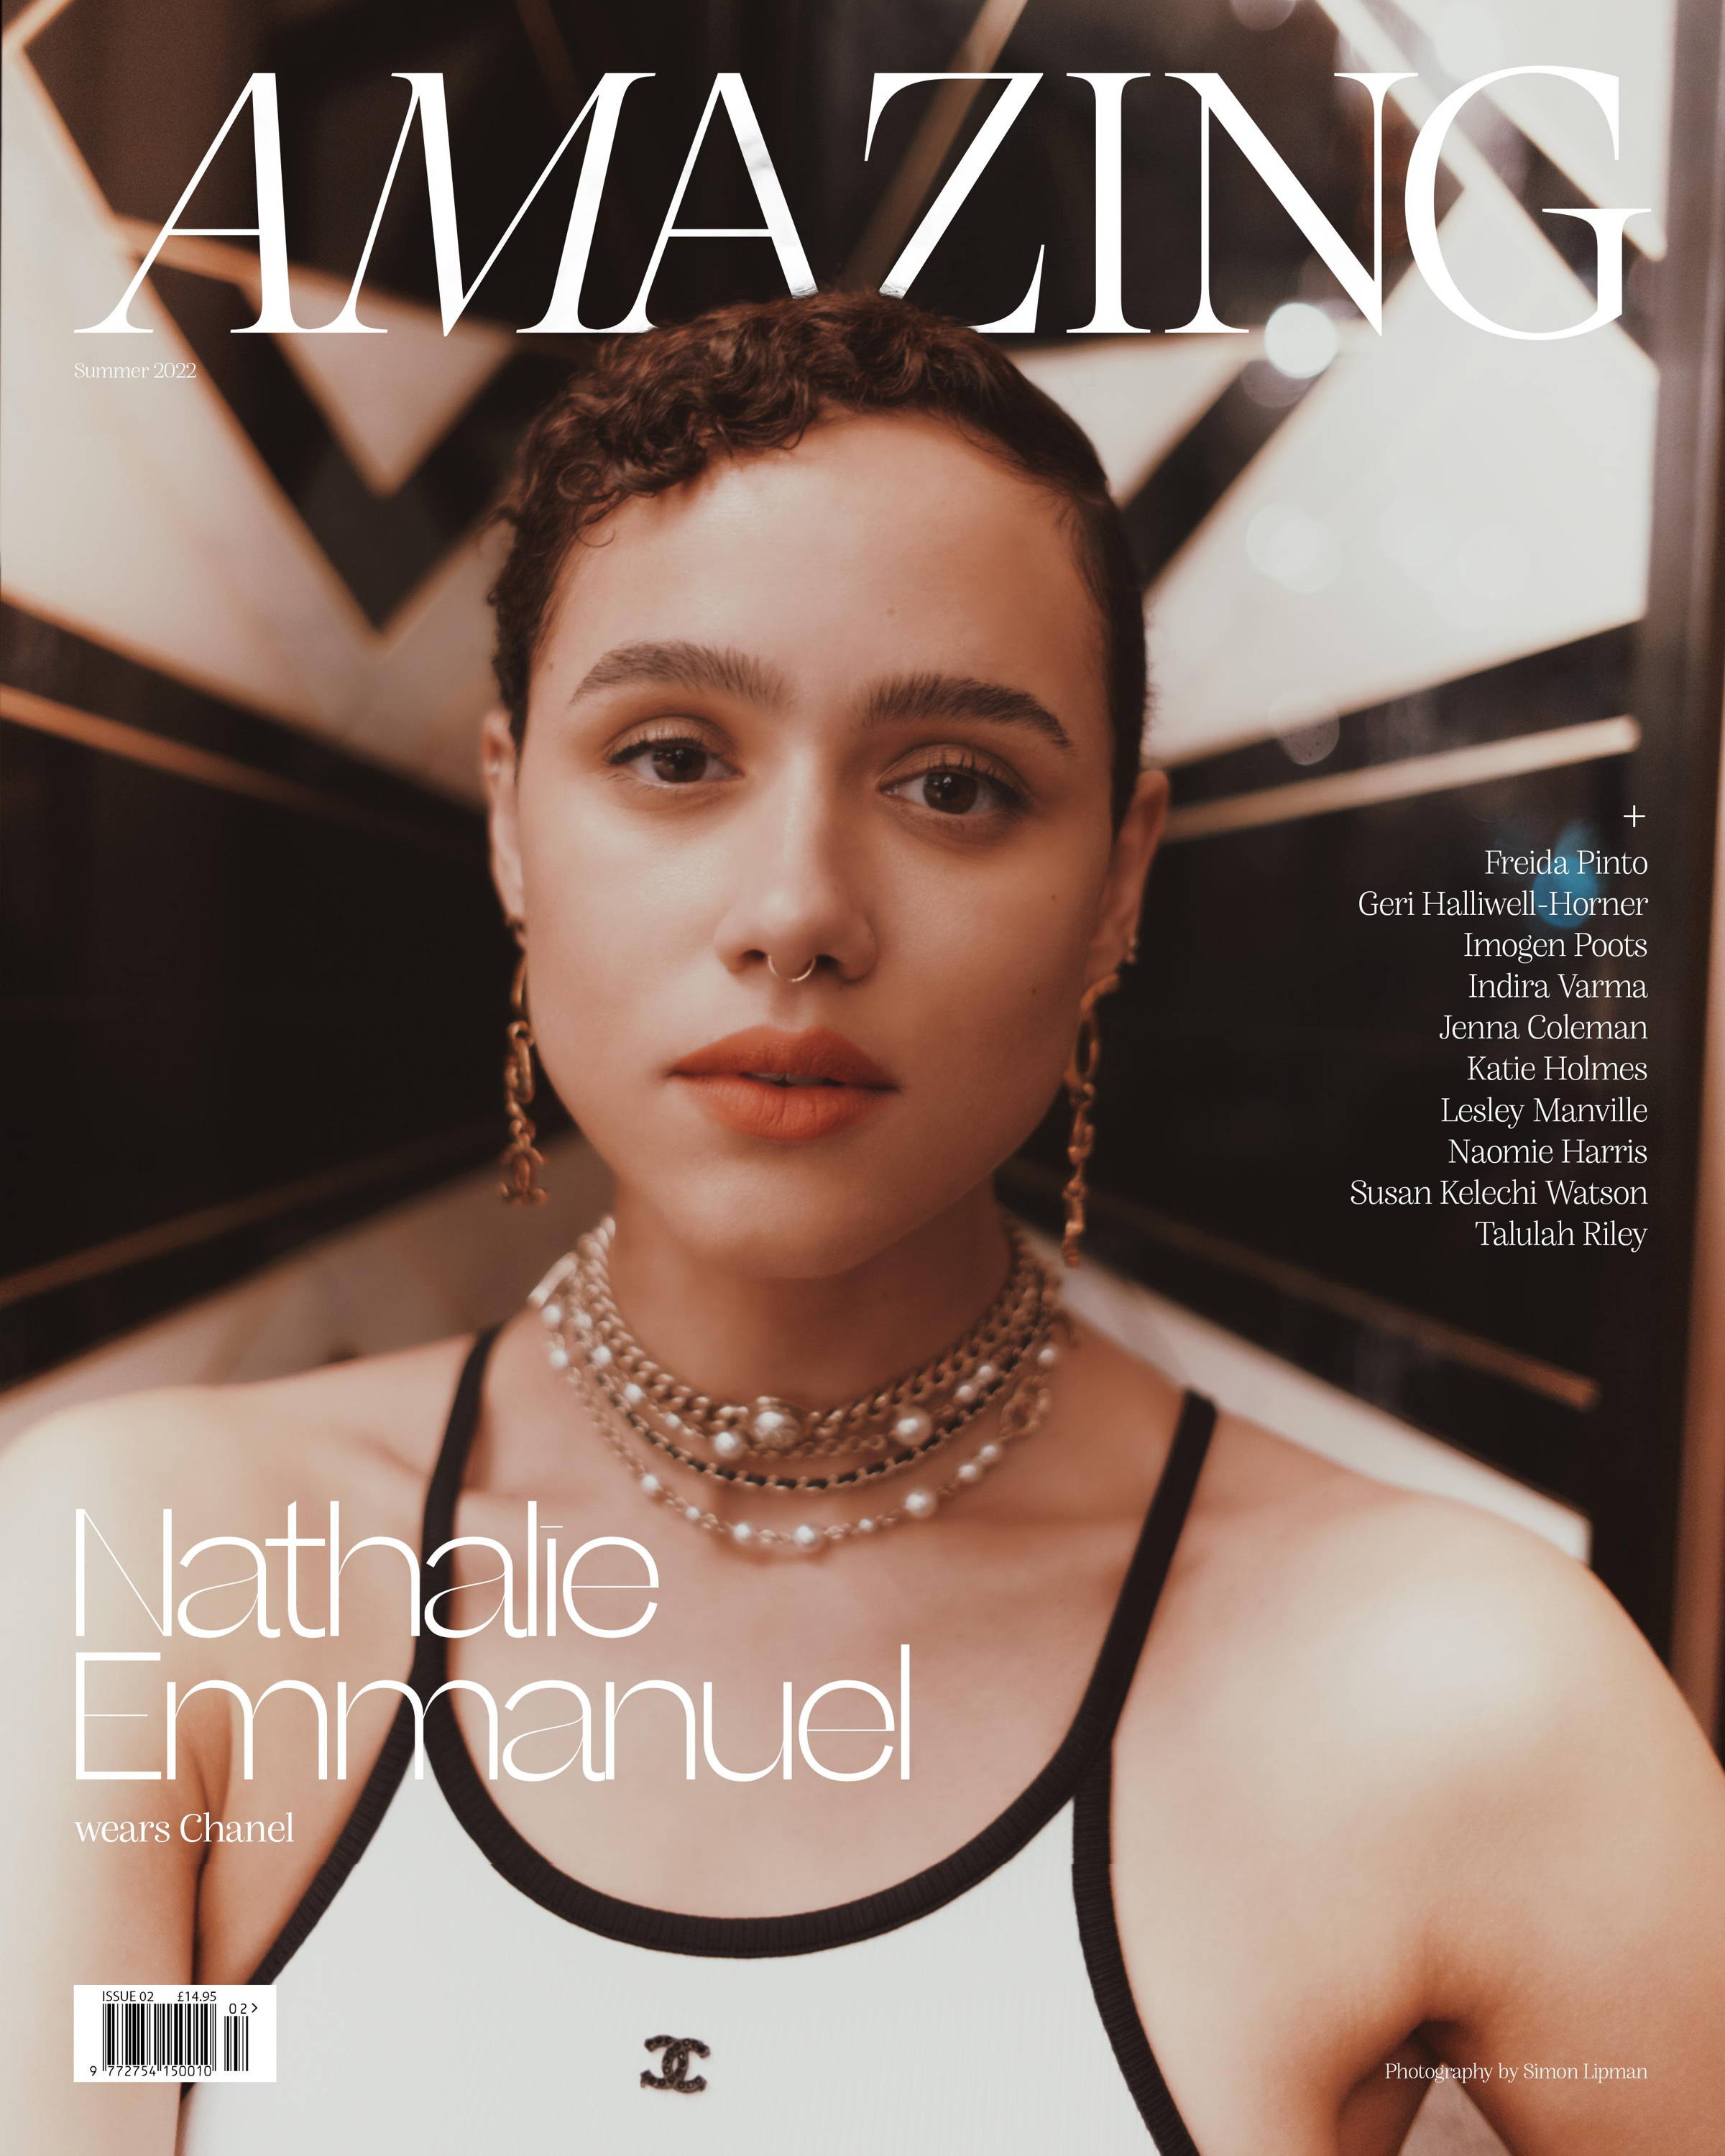 Nathalie Emmanuel is stepping in to her power with a stunning new look and an energy shift to match. The Invitation star chats about exploring different genres, manifesting her dreams and getting back on set with her Fast & Furious family in AMAZING issue 2.